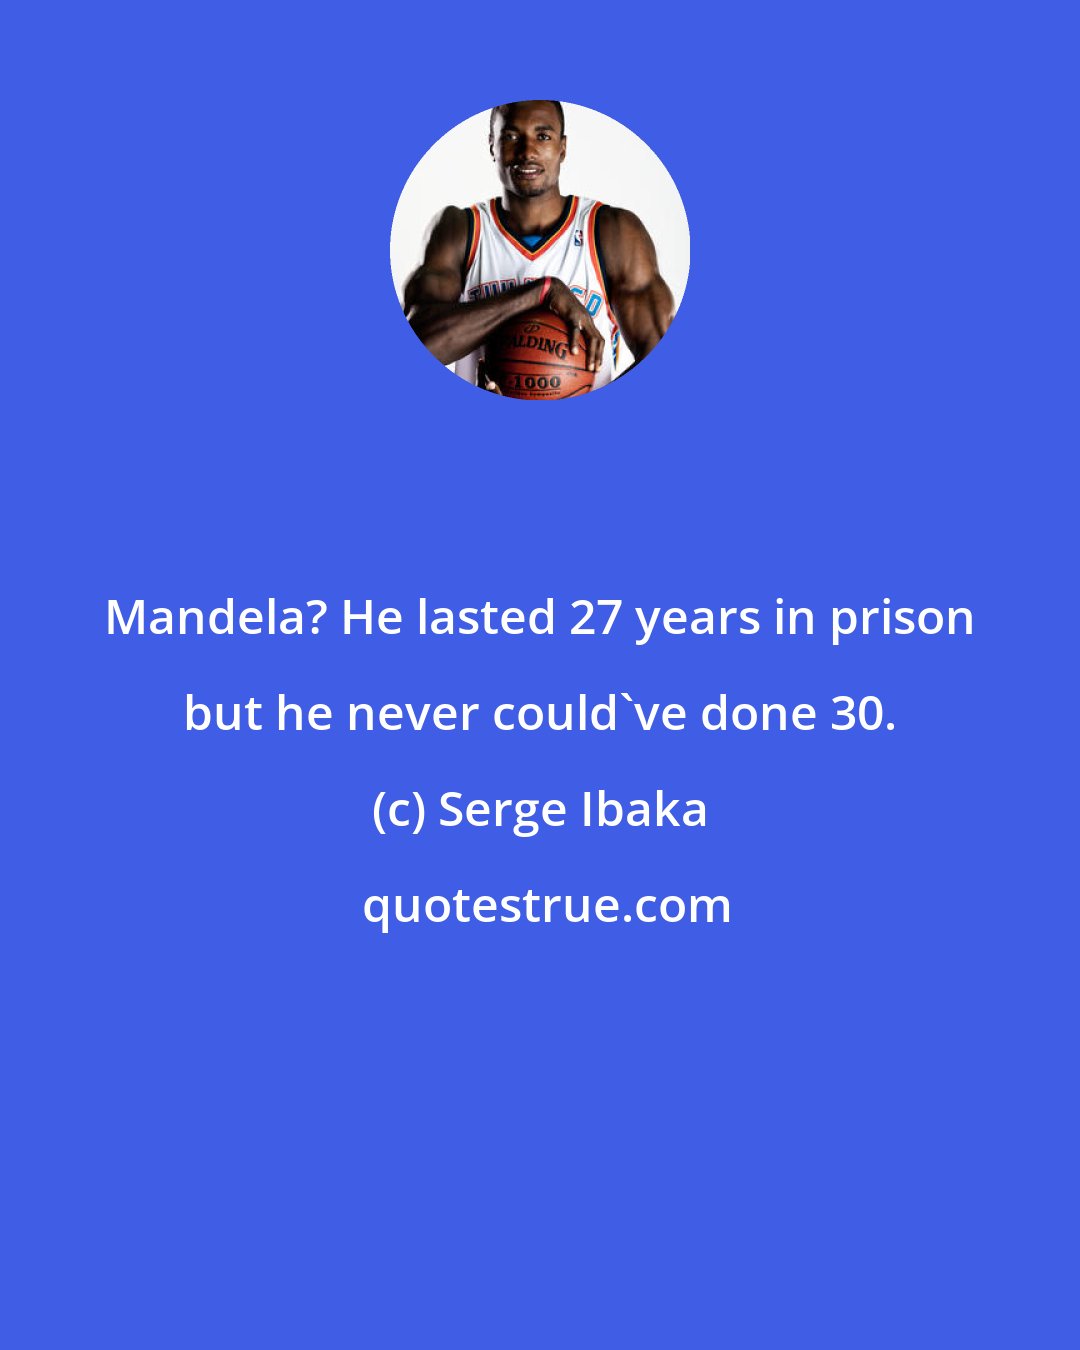 Serge Ibaka: Mandela? He lasted 27 years in prison but he never could've done 30.